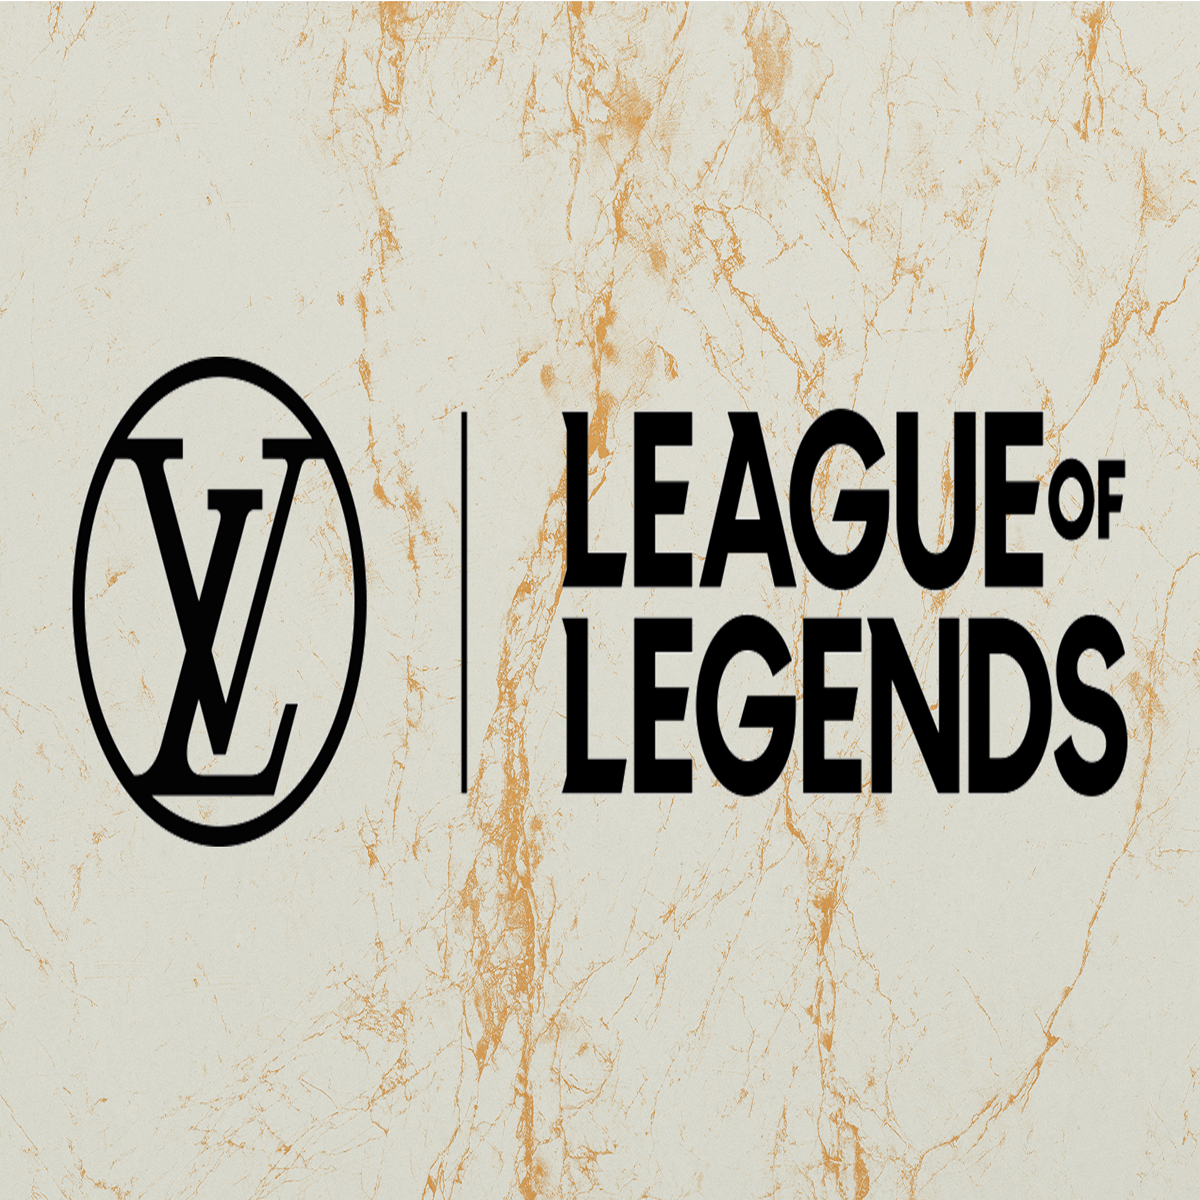 Louis Vuitton launches their collaboration with League of Legends,  including a $515 keychain.